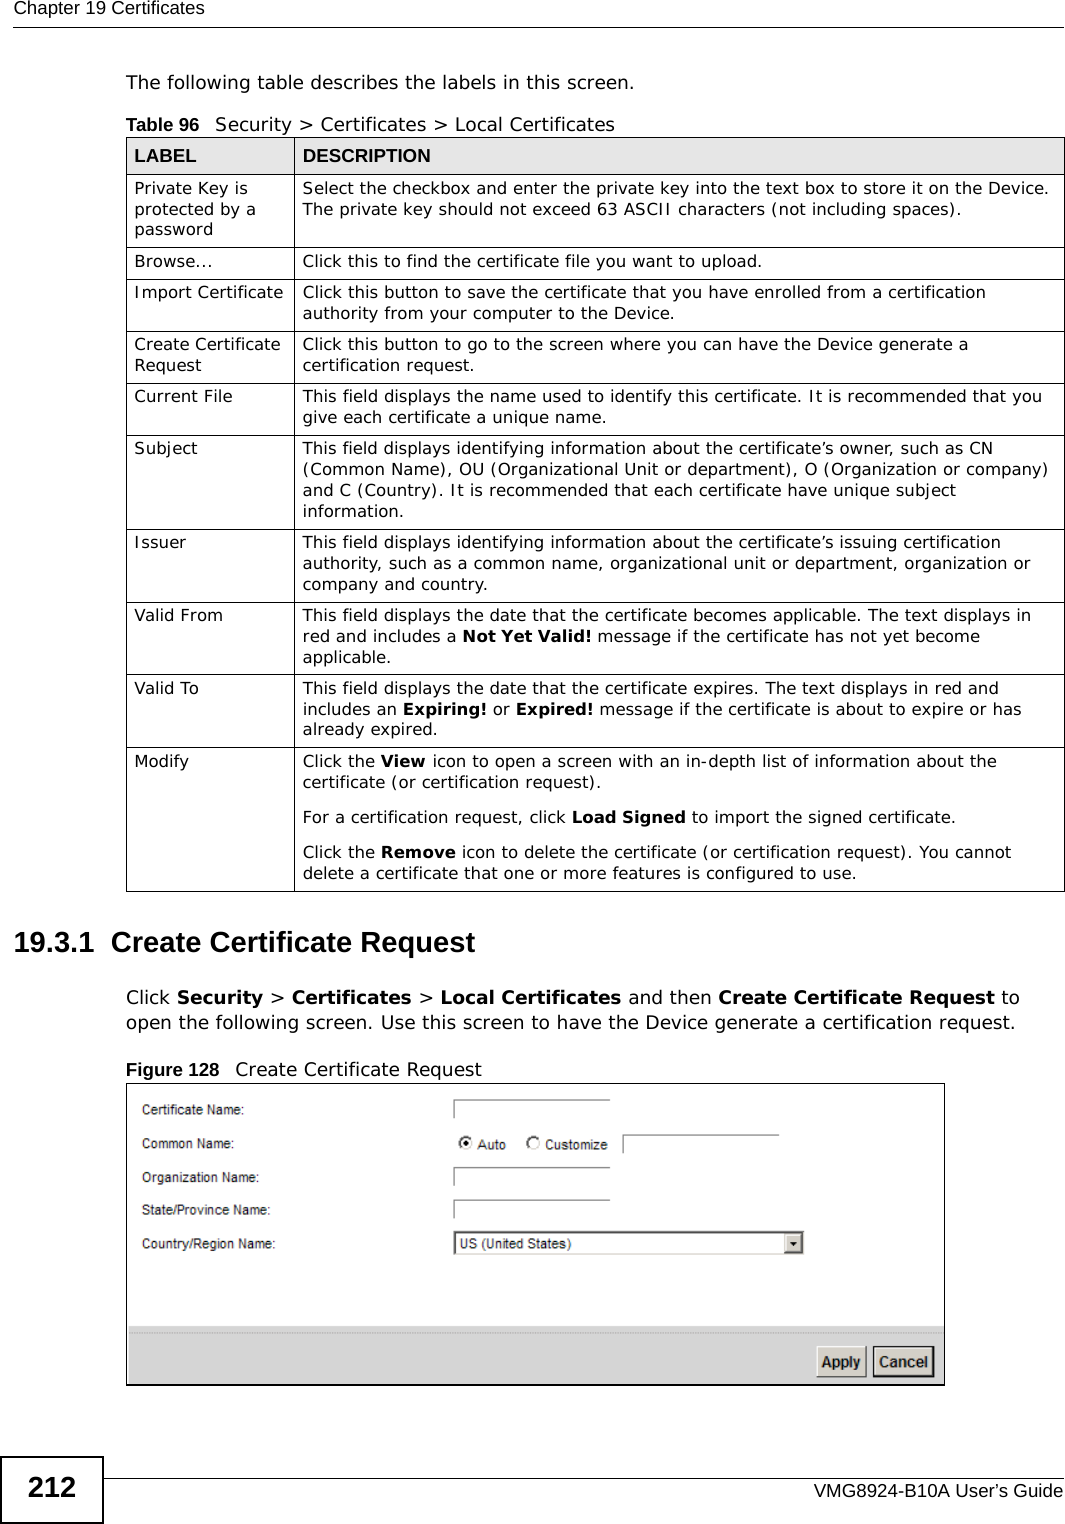 Chapter 19 CertificatesVMG8924-B10A User’s Guide212The following table describes the labels in this screen. 19.3.1  Create Certificate Request Click Security &gt; Certificates &gt; Local Certificates and then Create Certificate Request to open the following screen. Use this screen to have the Device generate a certification request.Figure 128   Create Certificate RequestTable 96   Security &gt; Certificates &gt; Local CertificatesLABEL DESCRIPTIONPrivate Key is protected by a passwordSelect the checkbox and enter the private key into the text box to store it on the Device. The private key should not exceed 63 ASCII characters (not including spaces). Browse... Click this to find the certificate file you want to upload. Import Certificate Click this button to save the certificate that you have enrolled from a certification authority from your computer to the Device.Create Certificate Request Click this button to go to the screen where you can have the Device generate a certification request.Current File This field displays the name used to identify this certificate. It is recommended that you give each certificate a unique name. Subject This field displays identifying information about the certificate’s owner, such as CN (Common Name), OU (Organizational Unit or department), O (Organization or company) and C (Country). It is recommended that each certificate have unique subject information. Issuer This field displays identifying information about the certificate’s issuing certification authority, such as a common name, organizational unit or department, organization or company and country.Valid From This field displays the date that the certificate becomes applicable. The text displays in red and includes a Not Yet Valid! message if the certificate has not yet become applicable.Valid To This field displays the date that the certificate expires. The text displays in red and includes an Expiring! or Expired! message if the certificate is about to expire or has already expired.Modify Click the View icon to open a screen with an in-depth list of information about the certificate (or certification request).For a certification request, click Load Signed to import the signed certificate.Click the Remove icon to delete the certificate (or certification request). You cannot delete a certificate that one or more features is configured to use.